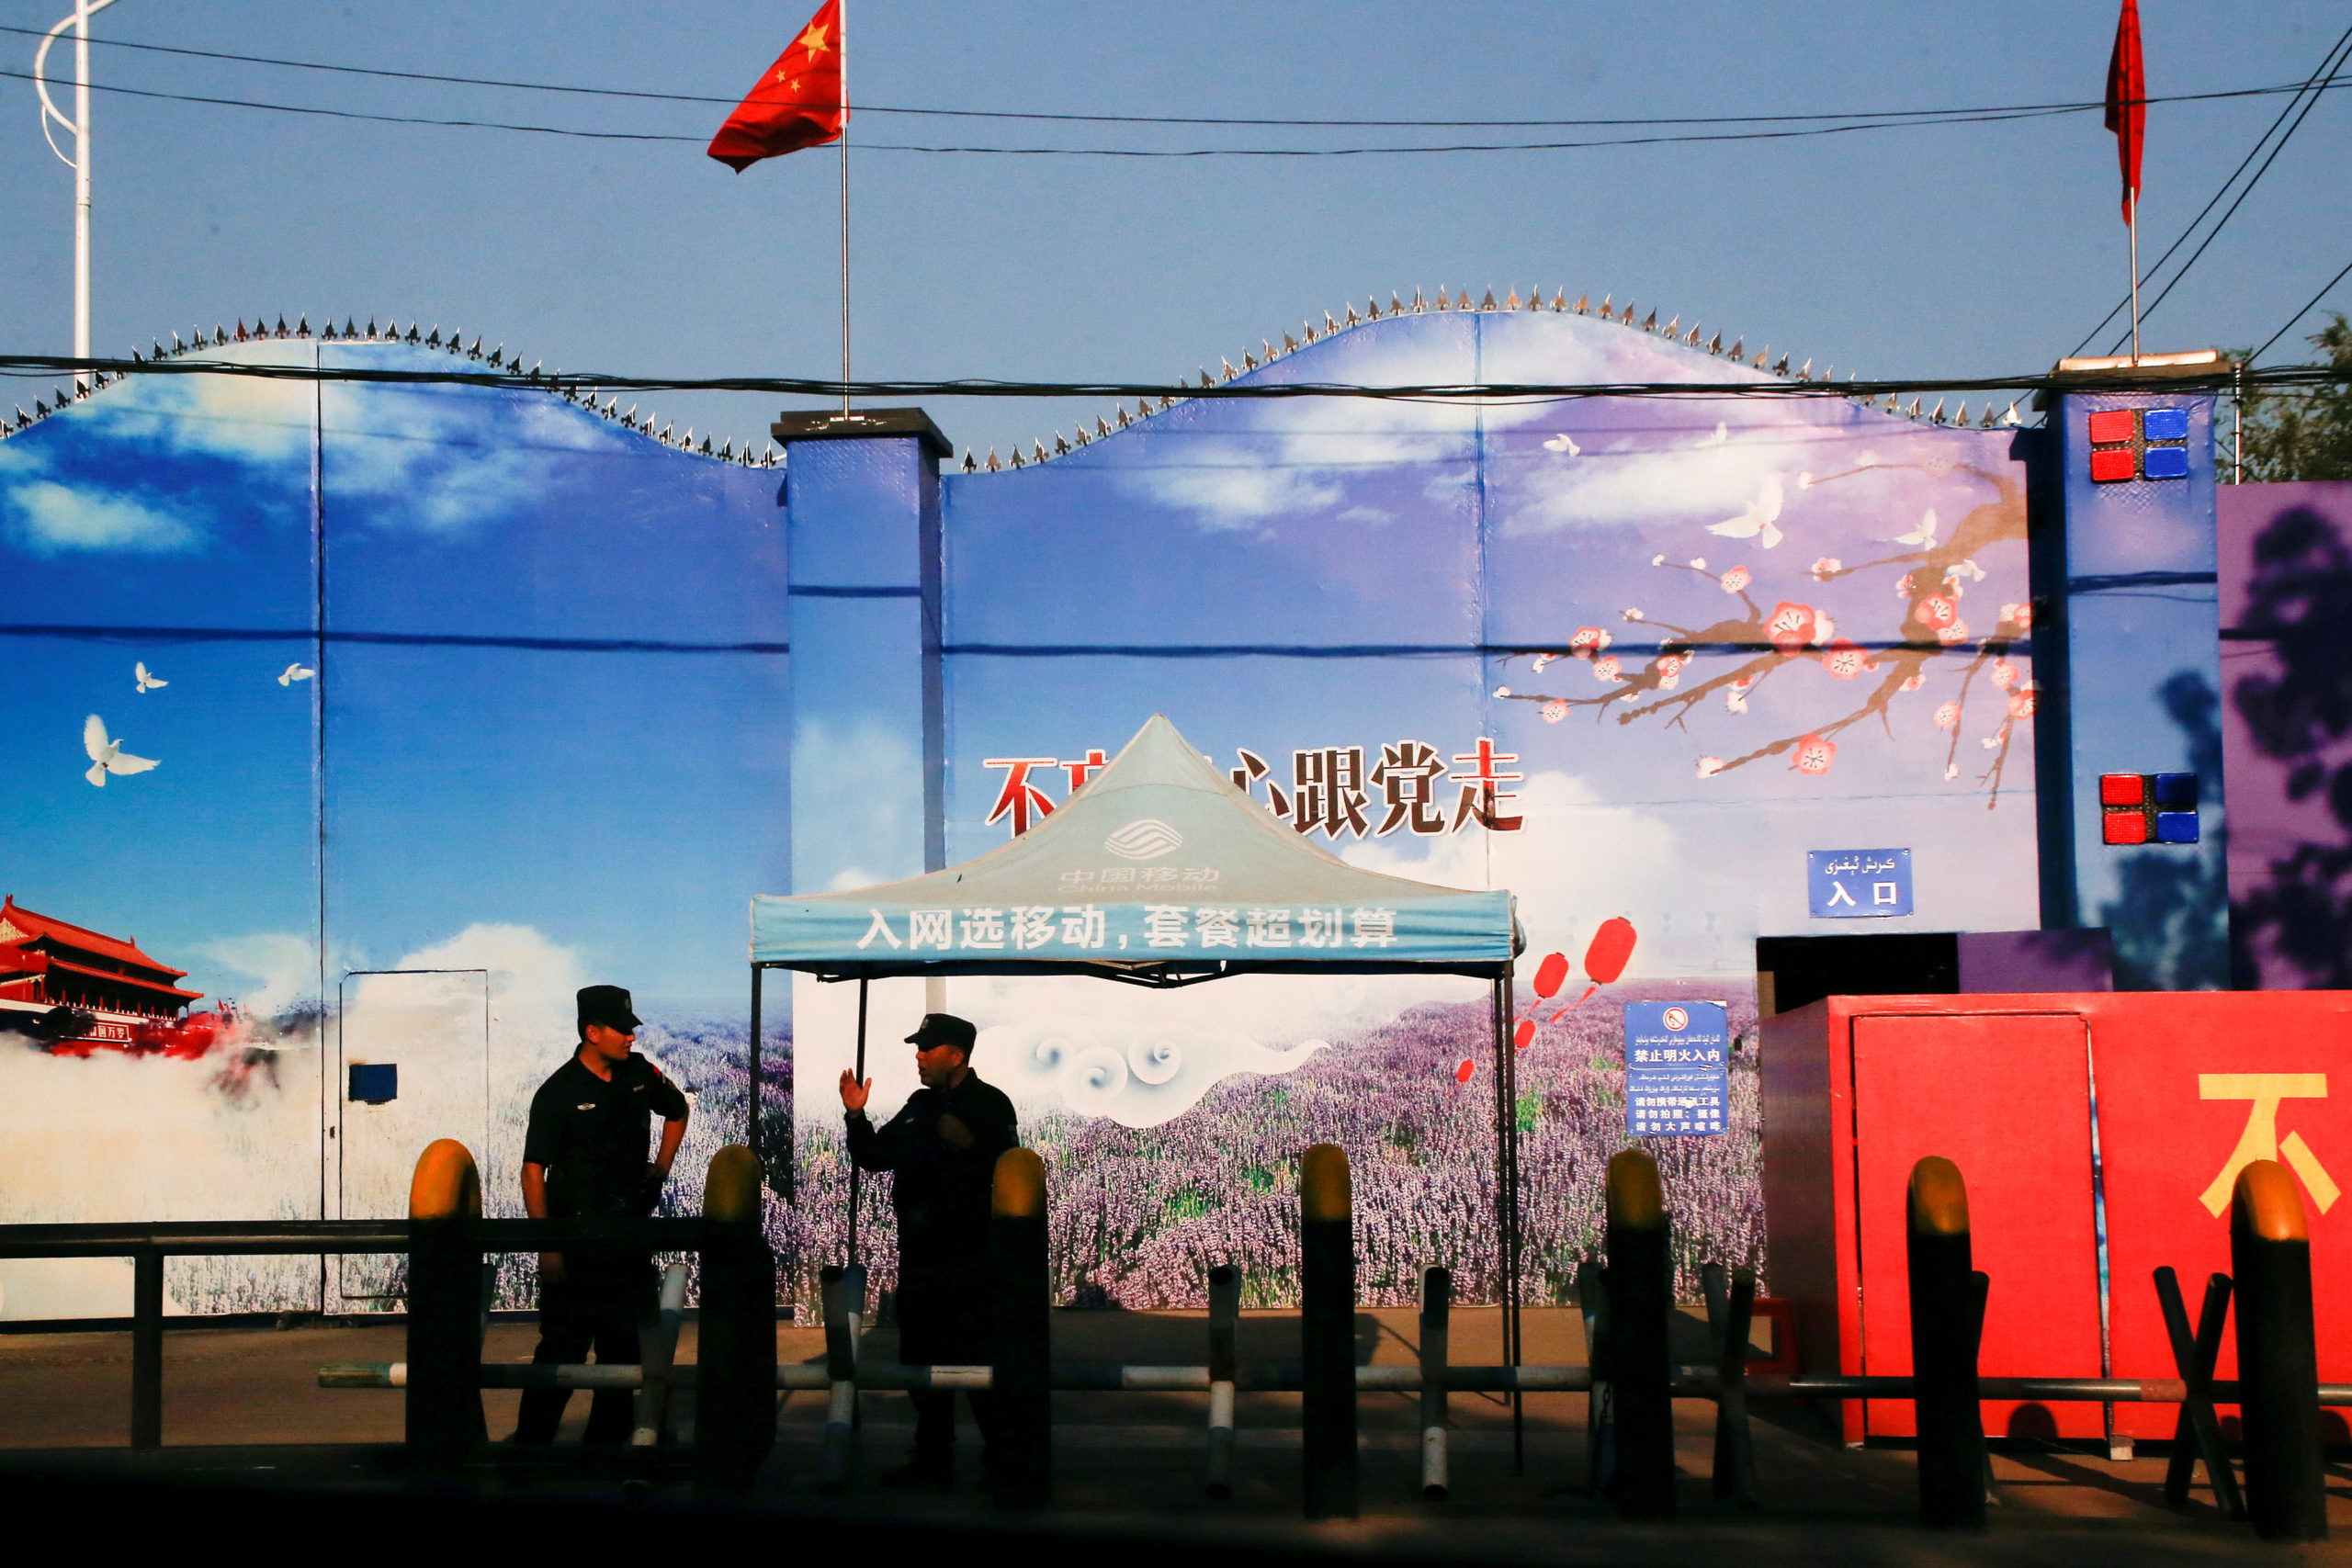 Security guards stand at the gates of what is officially known as a vocational skills education center in Huocheng County in Xinjiang Uighur Autonomous Region, China